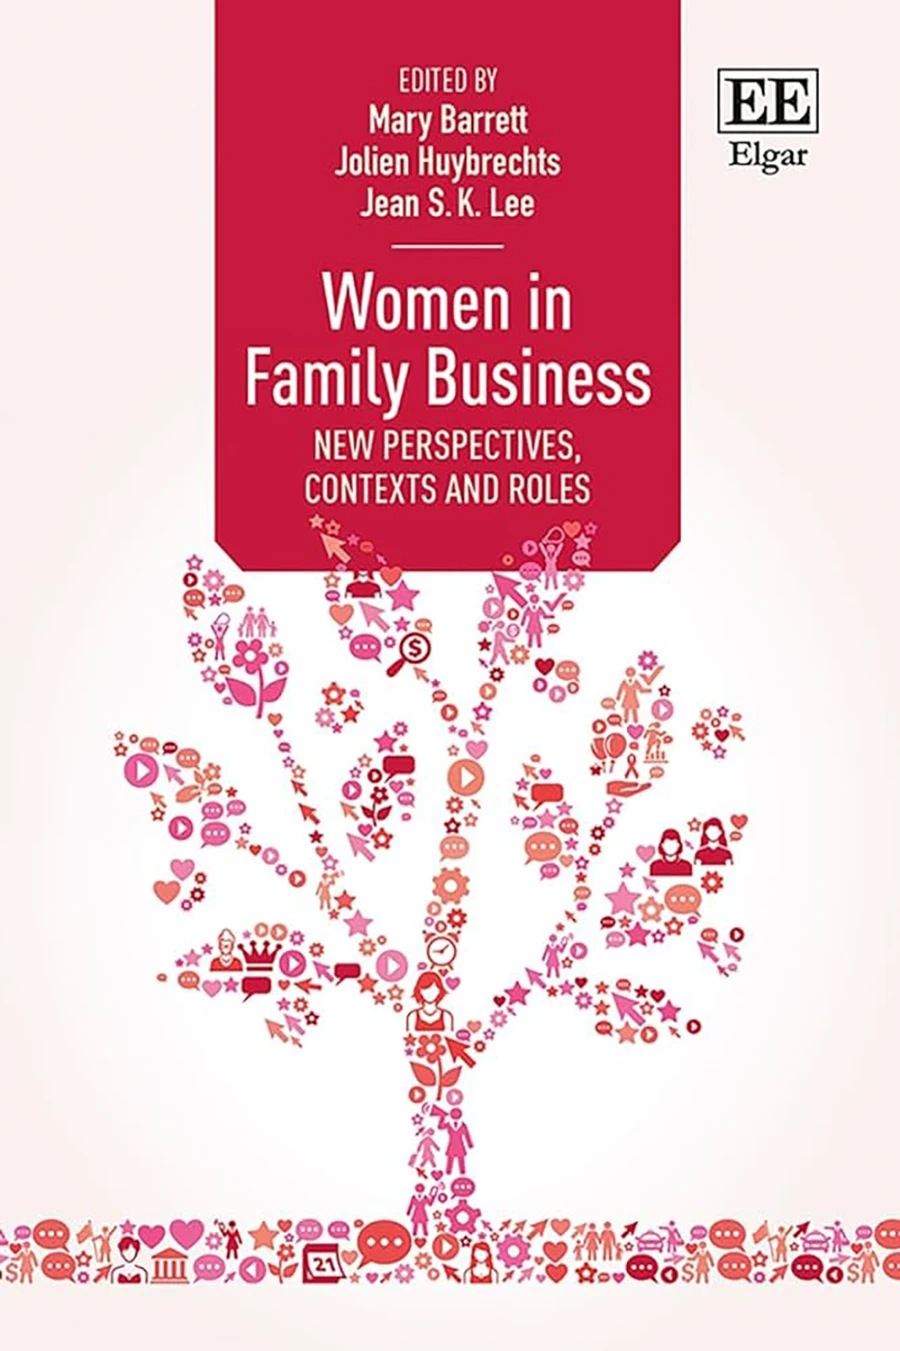 Women in Family Business: New Perspectives, Contexts and Roles, edited by Mary Barrett, Jolien Huybrechts and Jean S K Lee